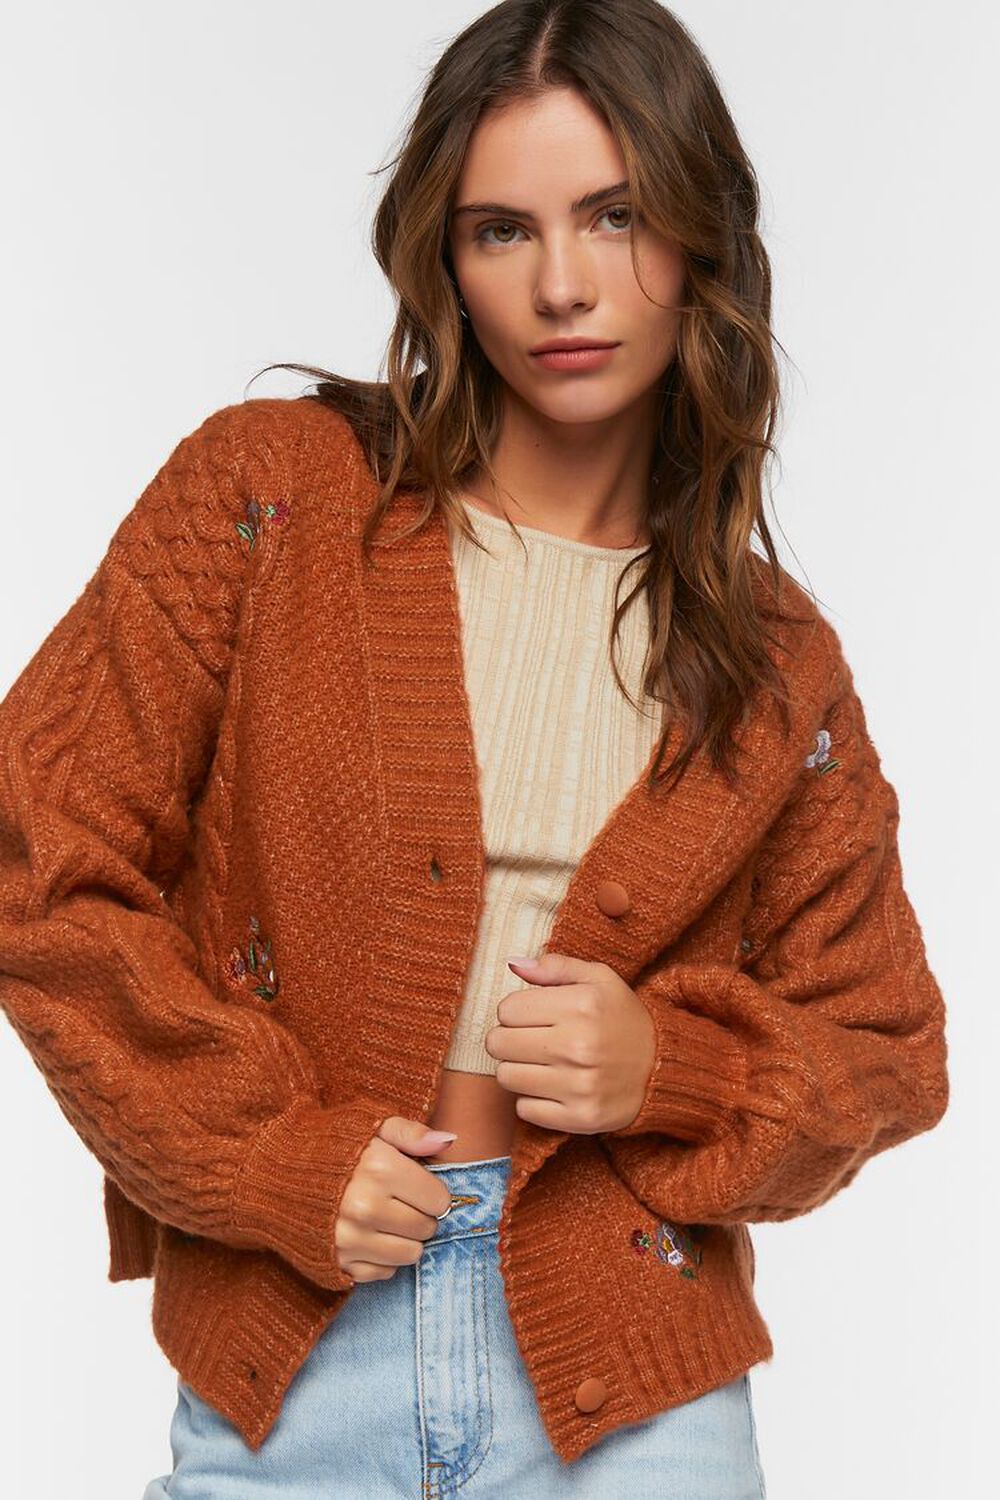 RUST/MULTI Floral Embroidered Cardigan Sweater, image 2